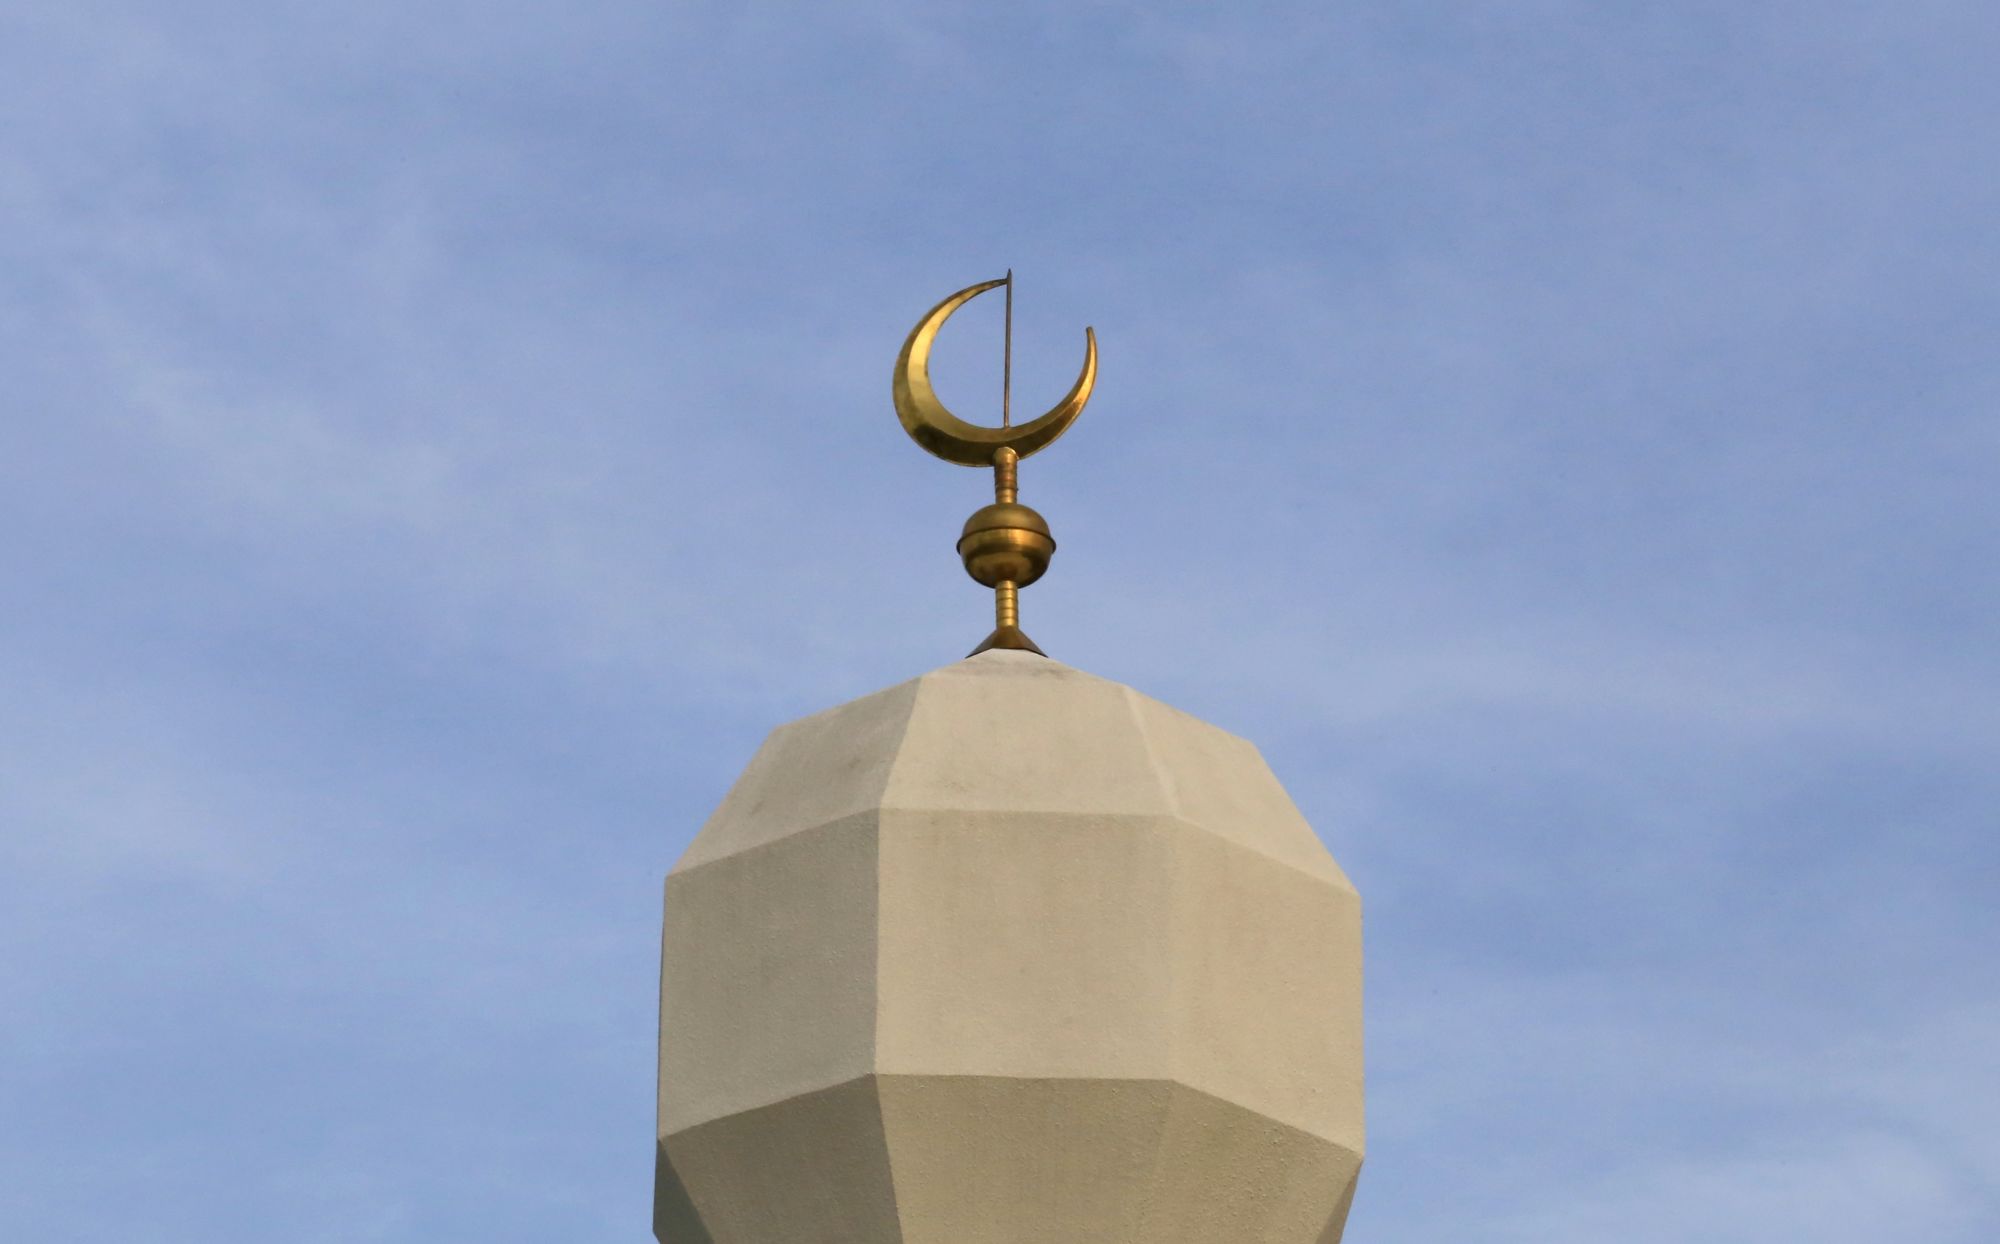 Ornate minaret on top of a mosque.